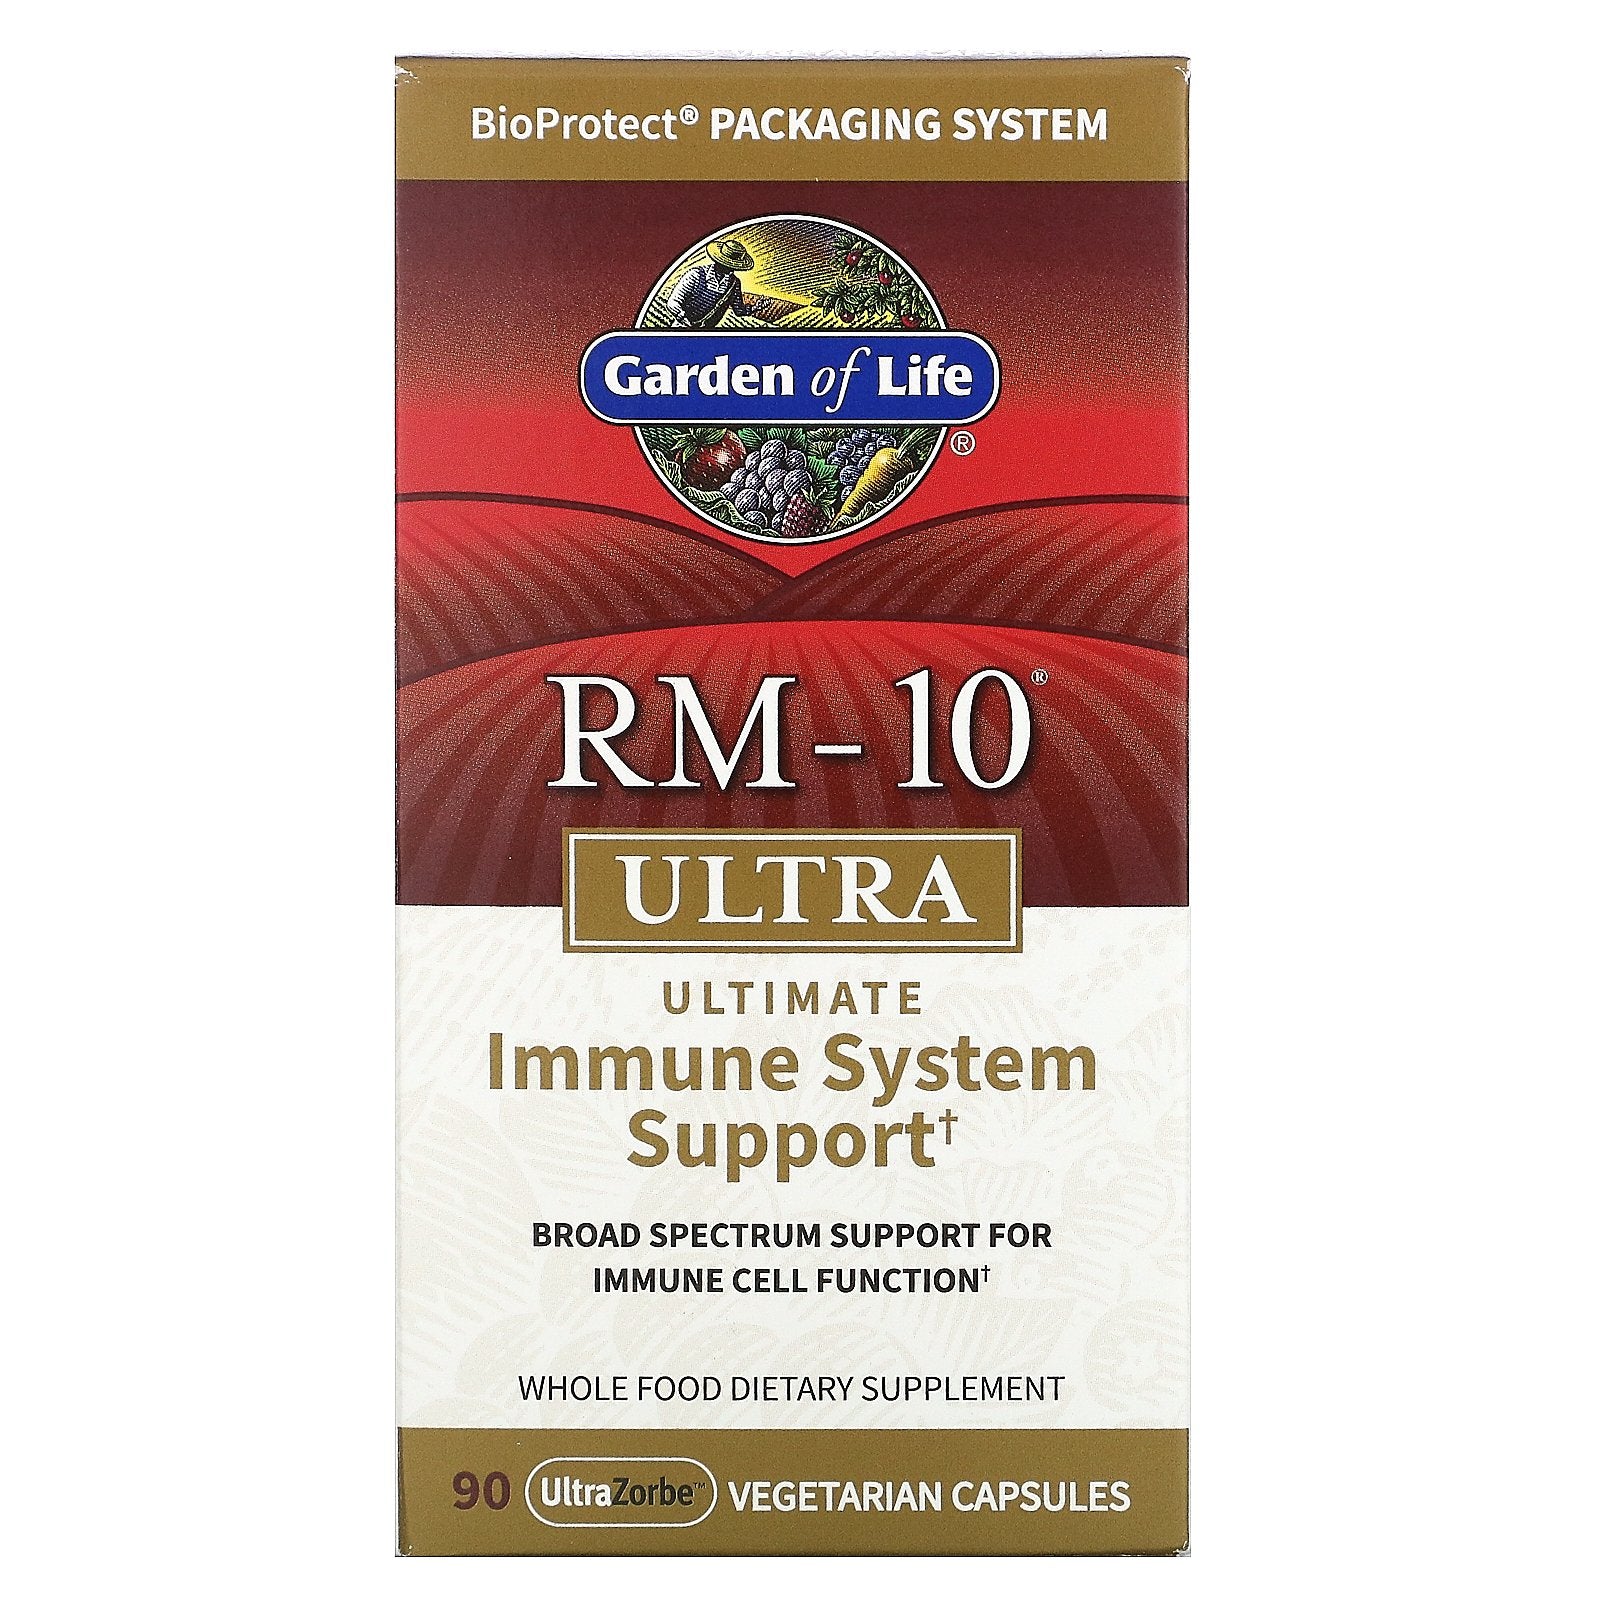 Garden of Life, RM-10 Ultra, Ultimate Immune System Support